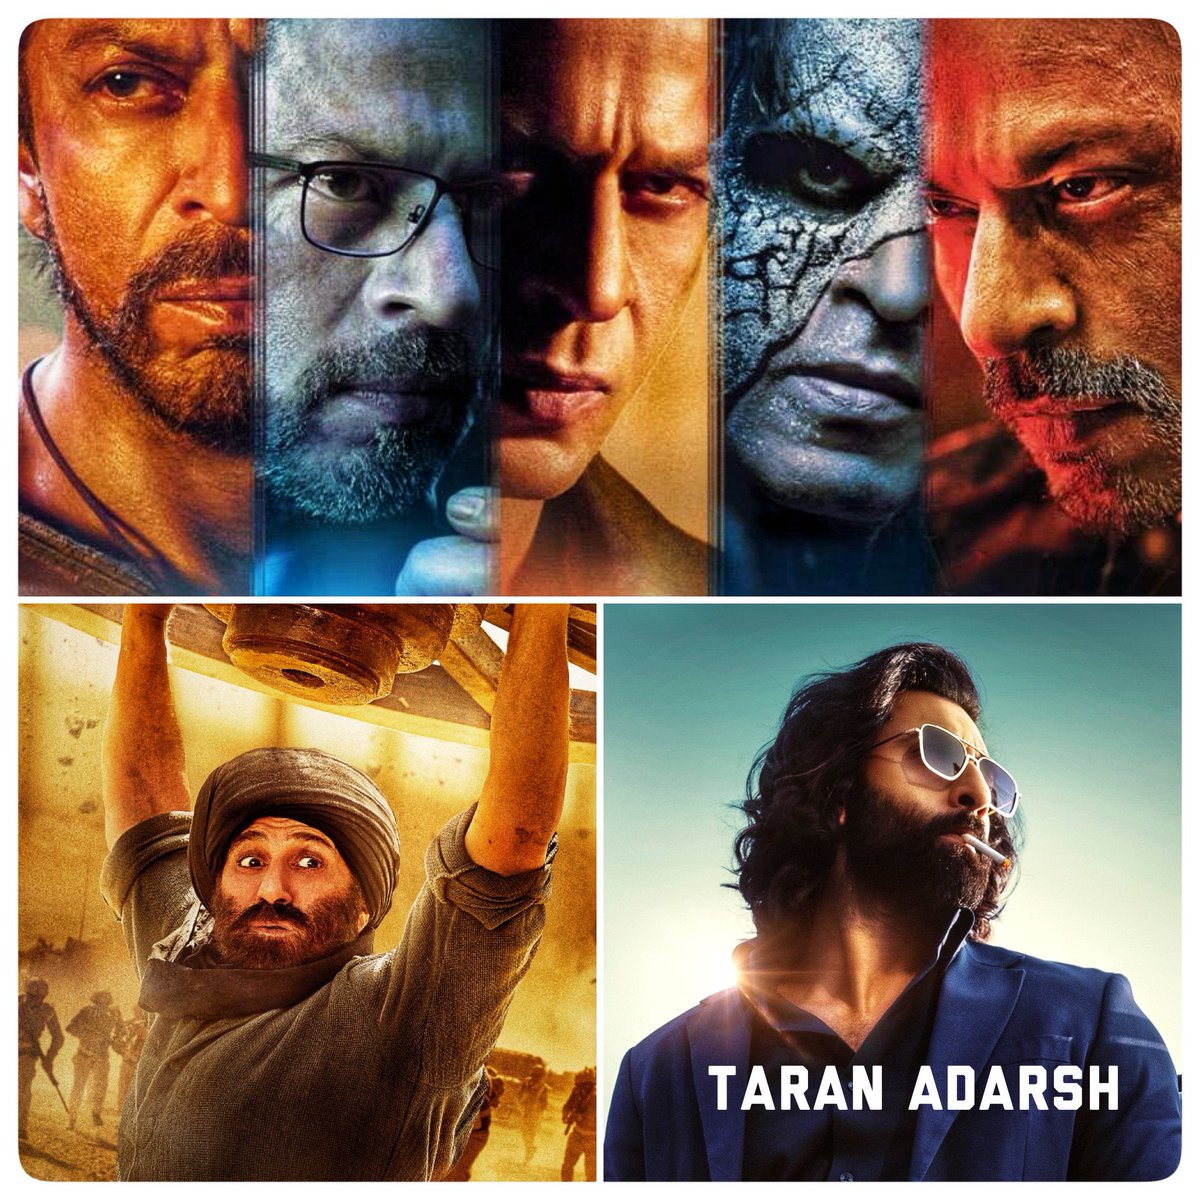 YOUR OPINION MATTERS… Next HINDI film to cross ₹ 50 cr *Nett BOC* on *Day 1* in #India?

Biggest *Day 1* so far…
⭐️ #Jawan: ₹ 65.50 cr
⭐️ #Pathaan: ₹ 55 cr
⭐️ #Animal: ₹ 54.75 cr
⭐️ #KGF2 #Hindi: ₹ 53.95 cr
⭐️ #War: ₹ 51.60 cr
⭐️ #TOH: ₹ 50.75 cr
Nett BOC.
✅ Forthcoming…